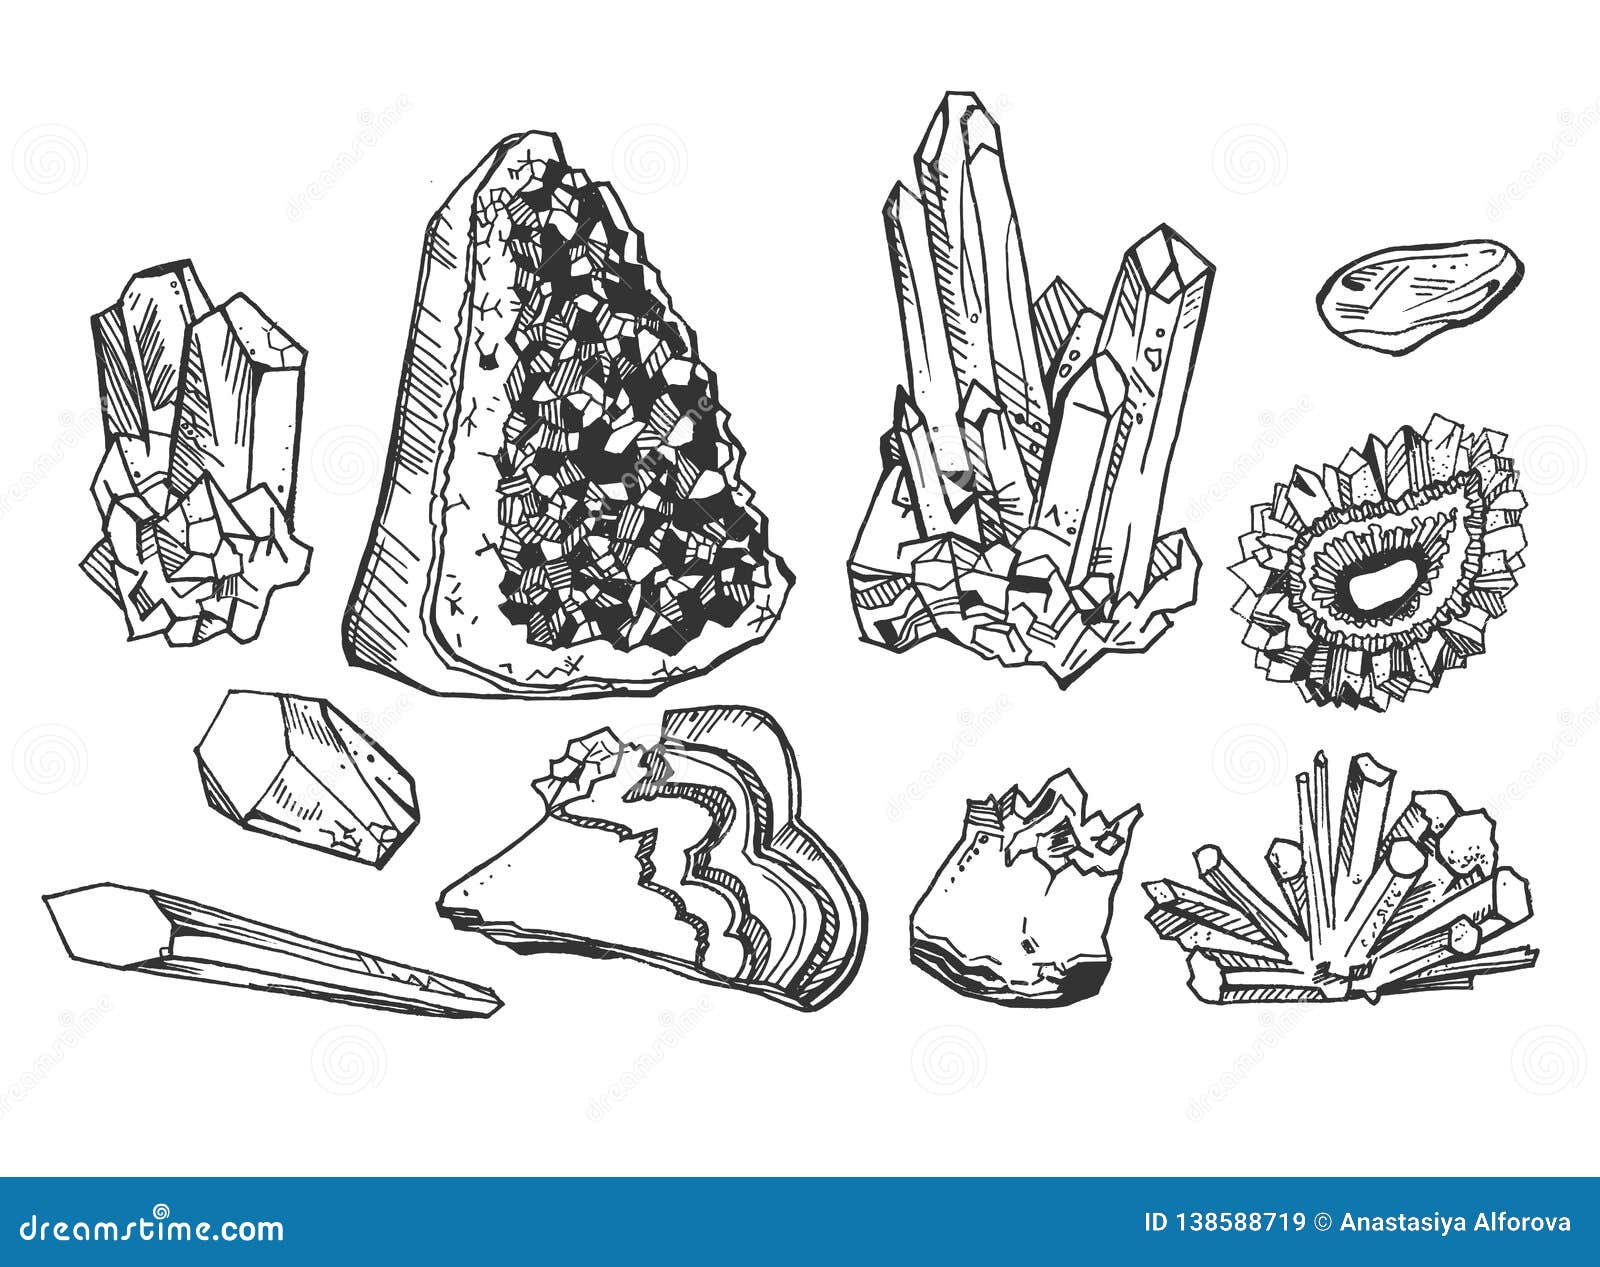 crystals and gem stones